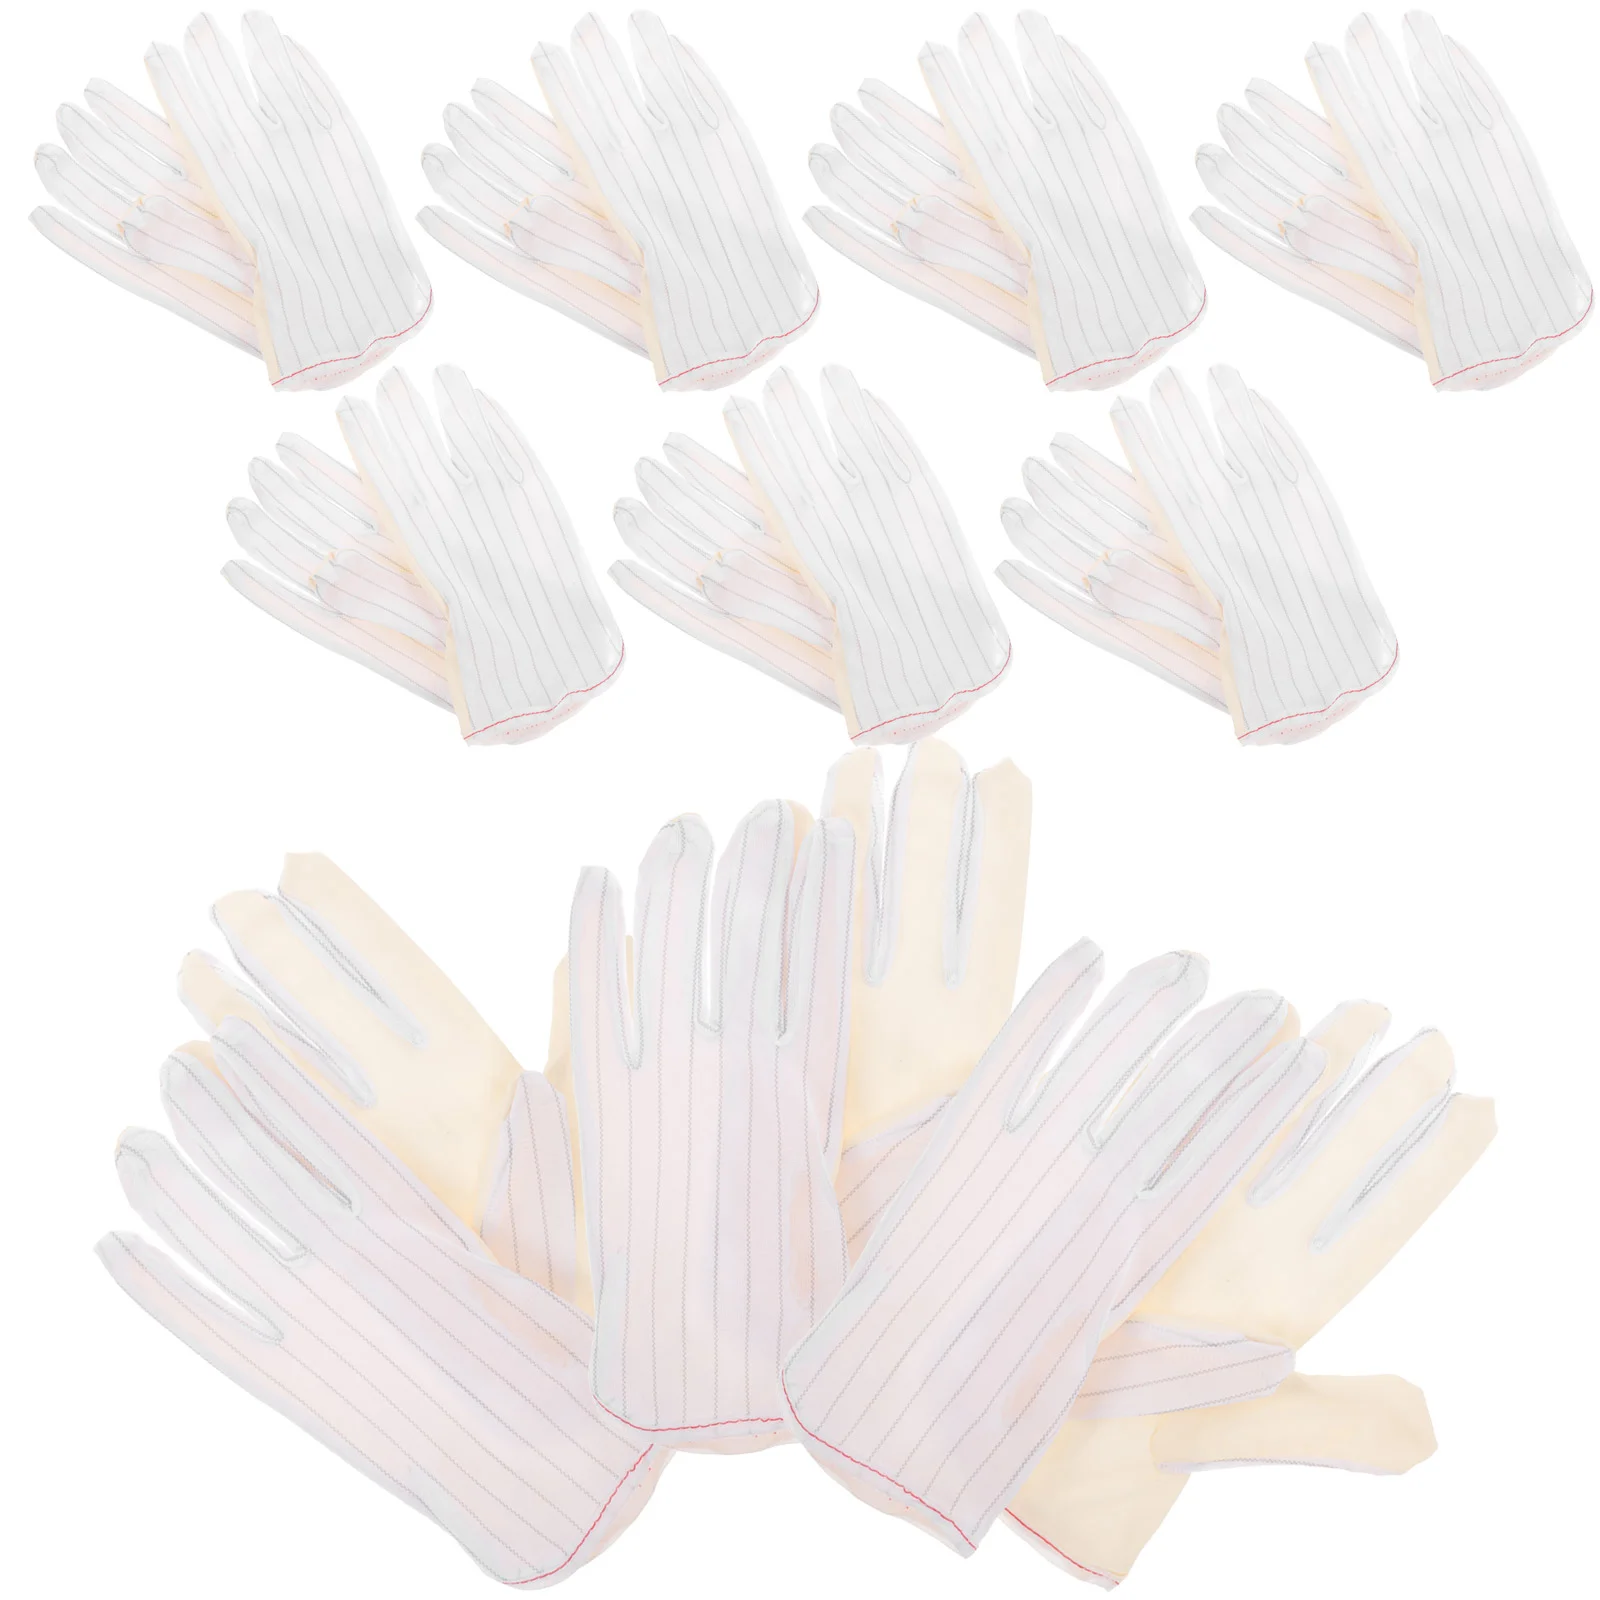 

10 Pairs Work Gloves Stage Moisture Hands Overnight Clean Jewelry Banquet Working Protection Practical